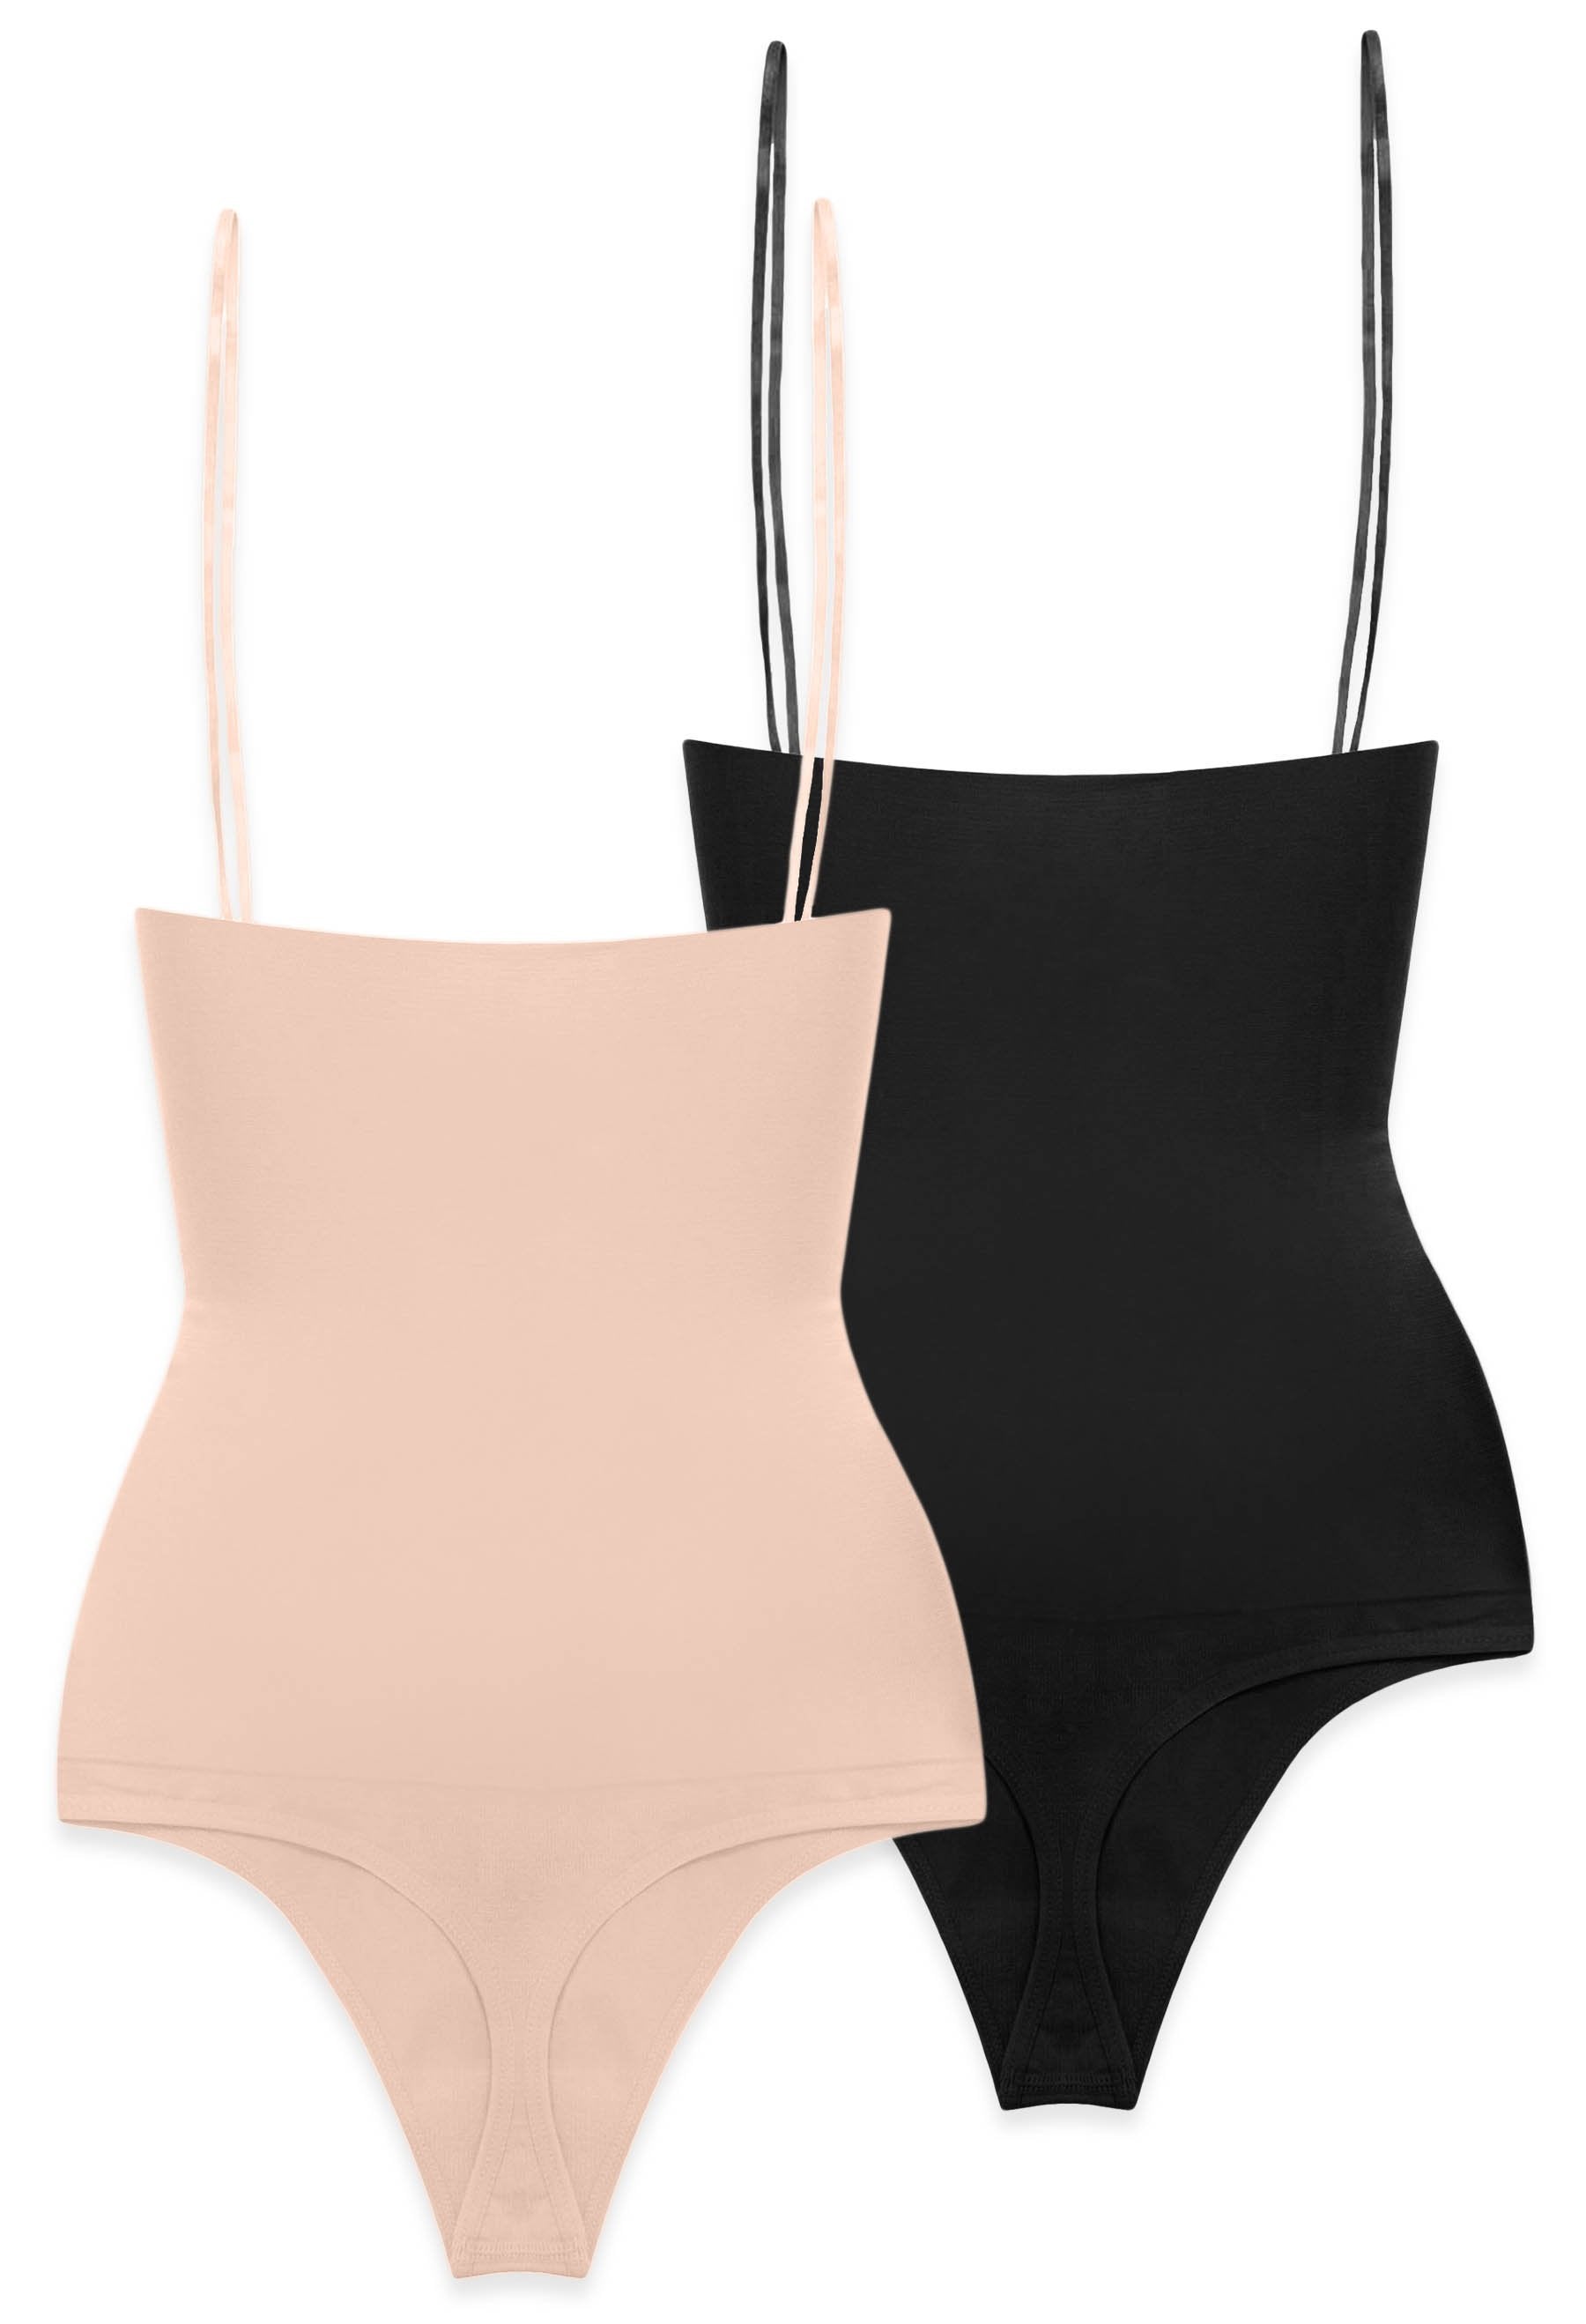 Post-Maternity Stay Up G String - 2 Pack